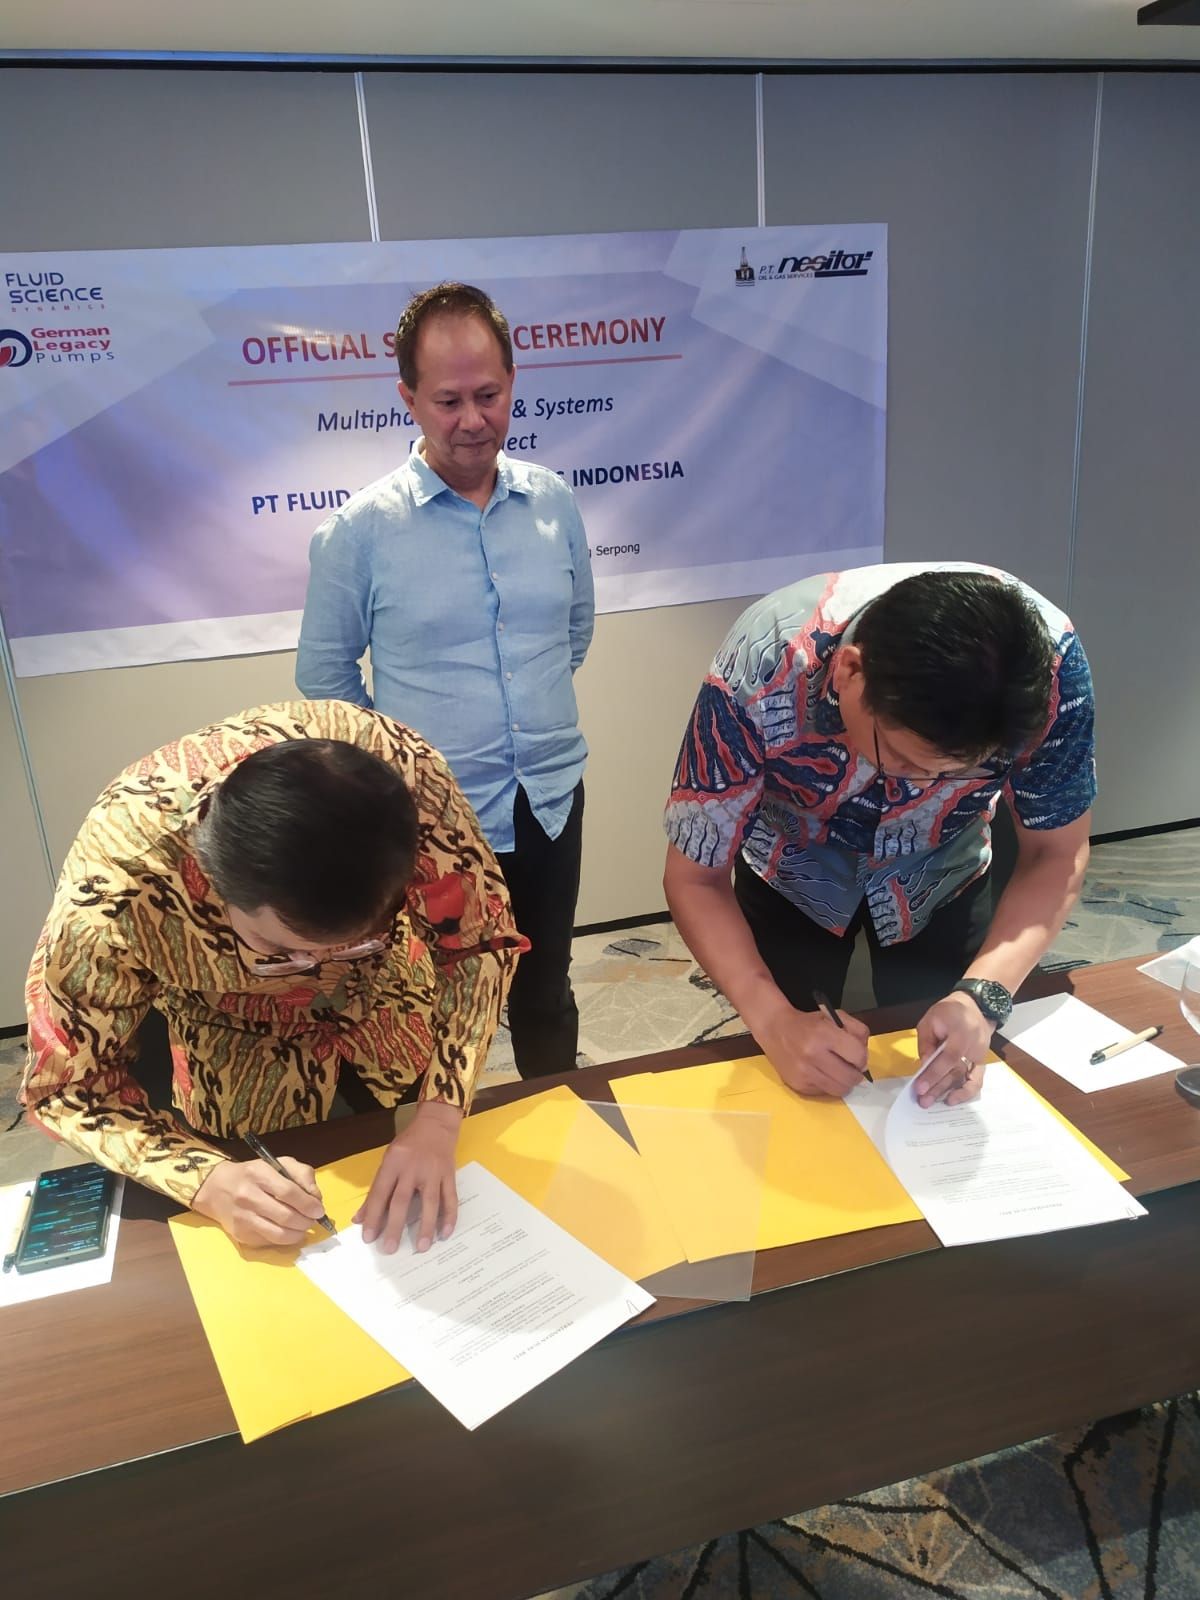 PT Fluid Science Dynamics Indonesia (FSD) and PT Nesitor signed Sales & Purchase Agreement for 1 (one) unit Multi Phase Pump (MPP) & Systems.

The MPP is designed and manufactured by GLPP Germany and will be packaged and integrated in Indonesia.The packaging & integration of Mechanical, E & I, Controls & On Skid Piping will be carried out by FSD Indonesia engineers.

This will become the 1st MPP in Indonesia and will be completed by FY23Q1.